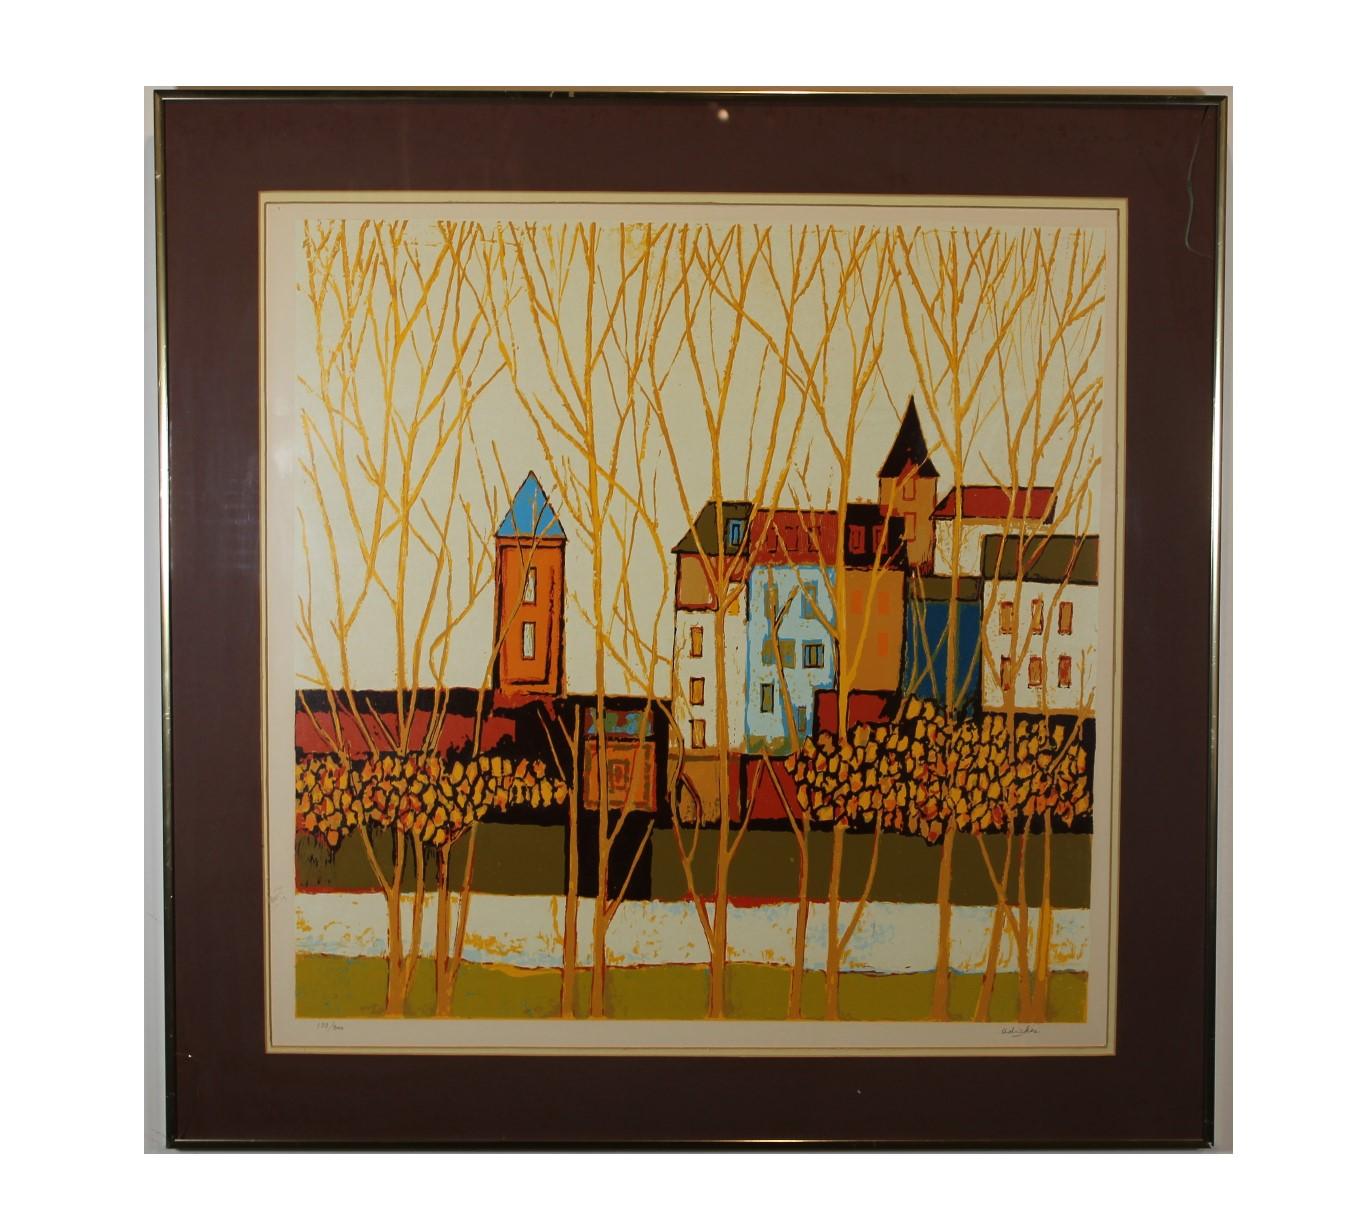 David Adickes Landscape Painting - Village Through the Trees Edition 133 of 300